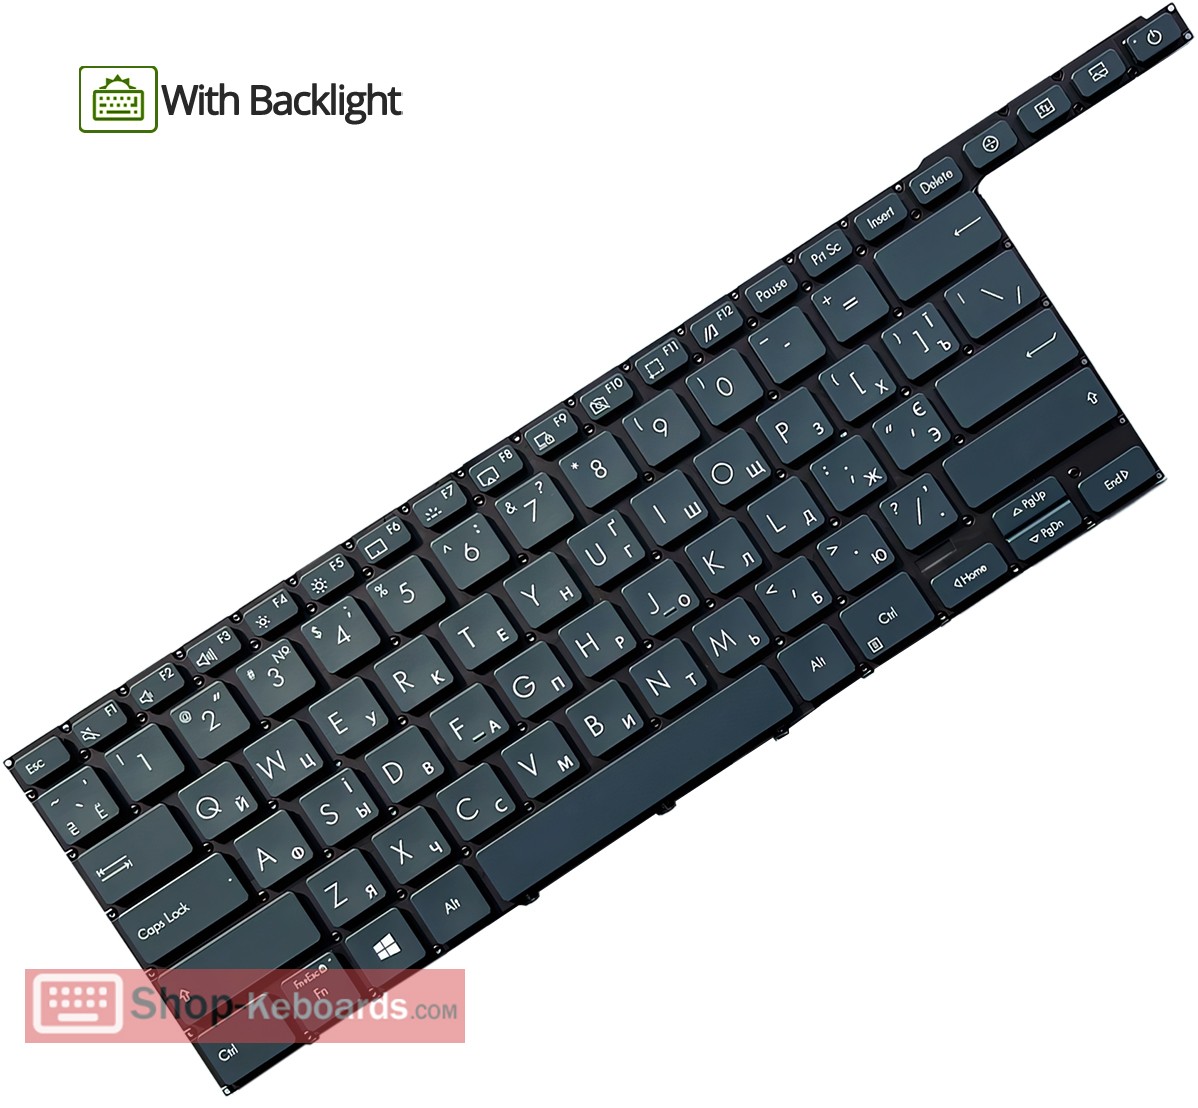 Asus 0KNB0-6823HE00  Keyboard replacement